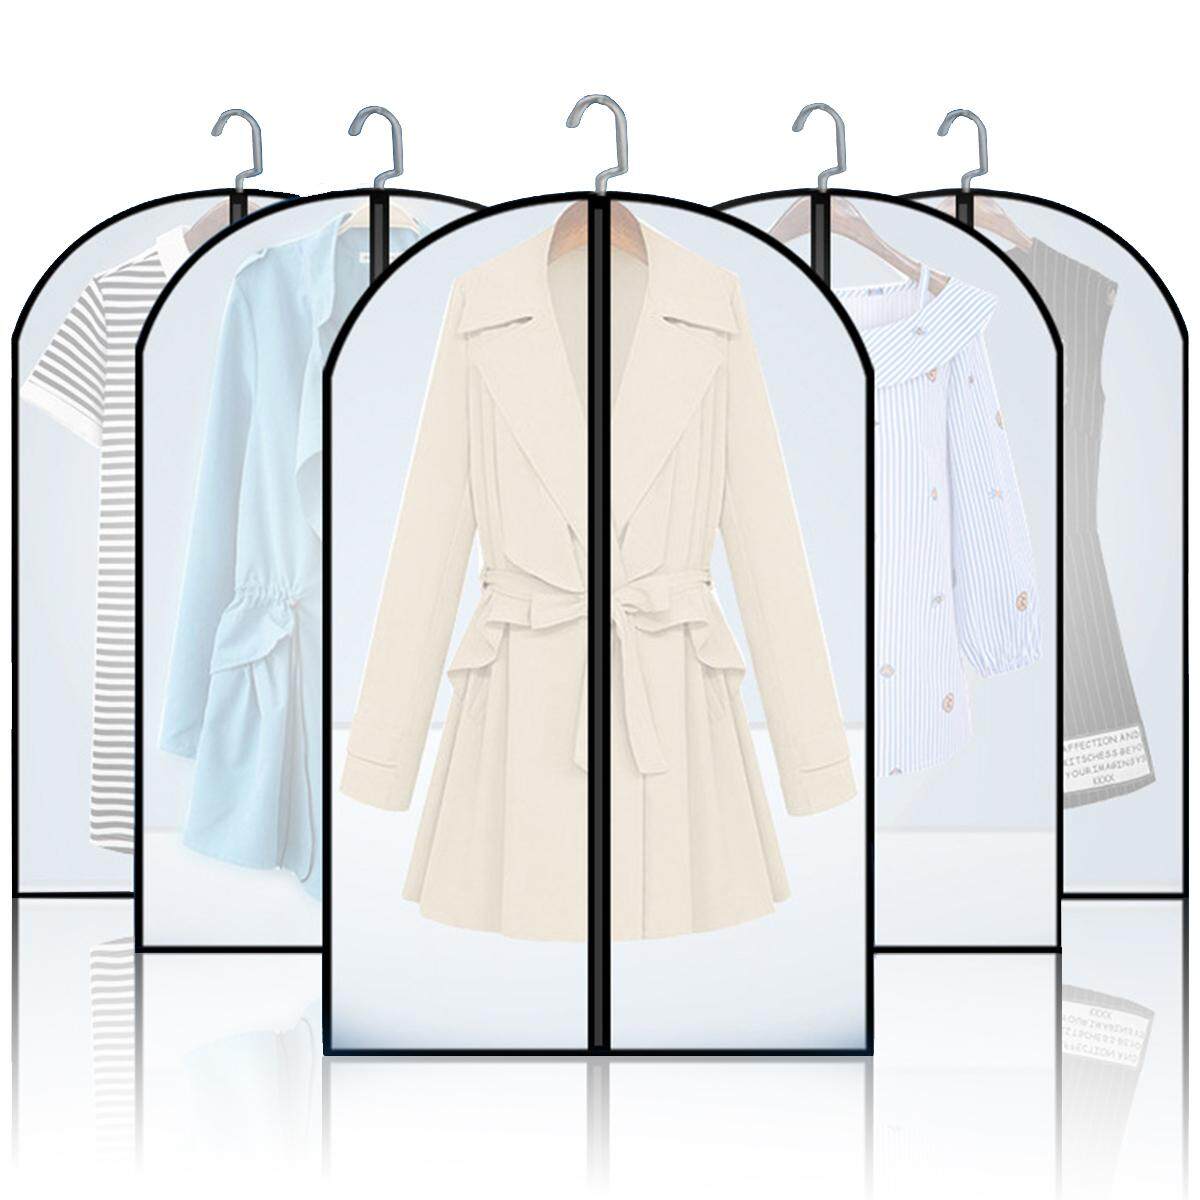 Clothing Dress Garment Suit Coat Dust Cover Protector Clear Wardrobe Storage Bag